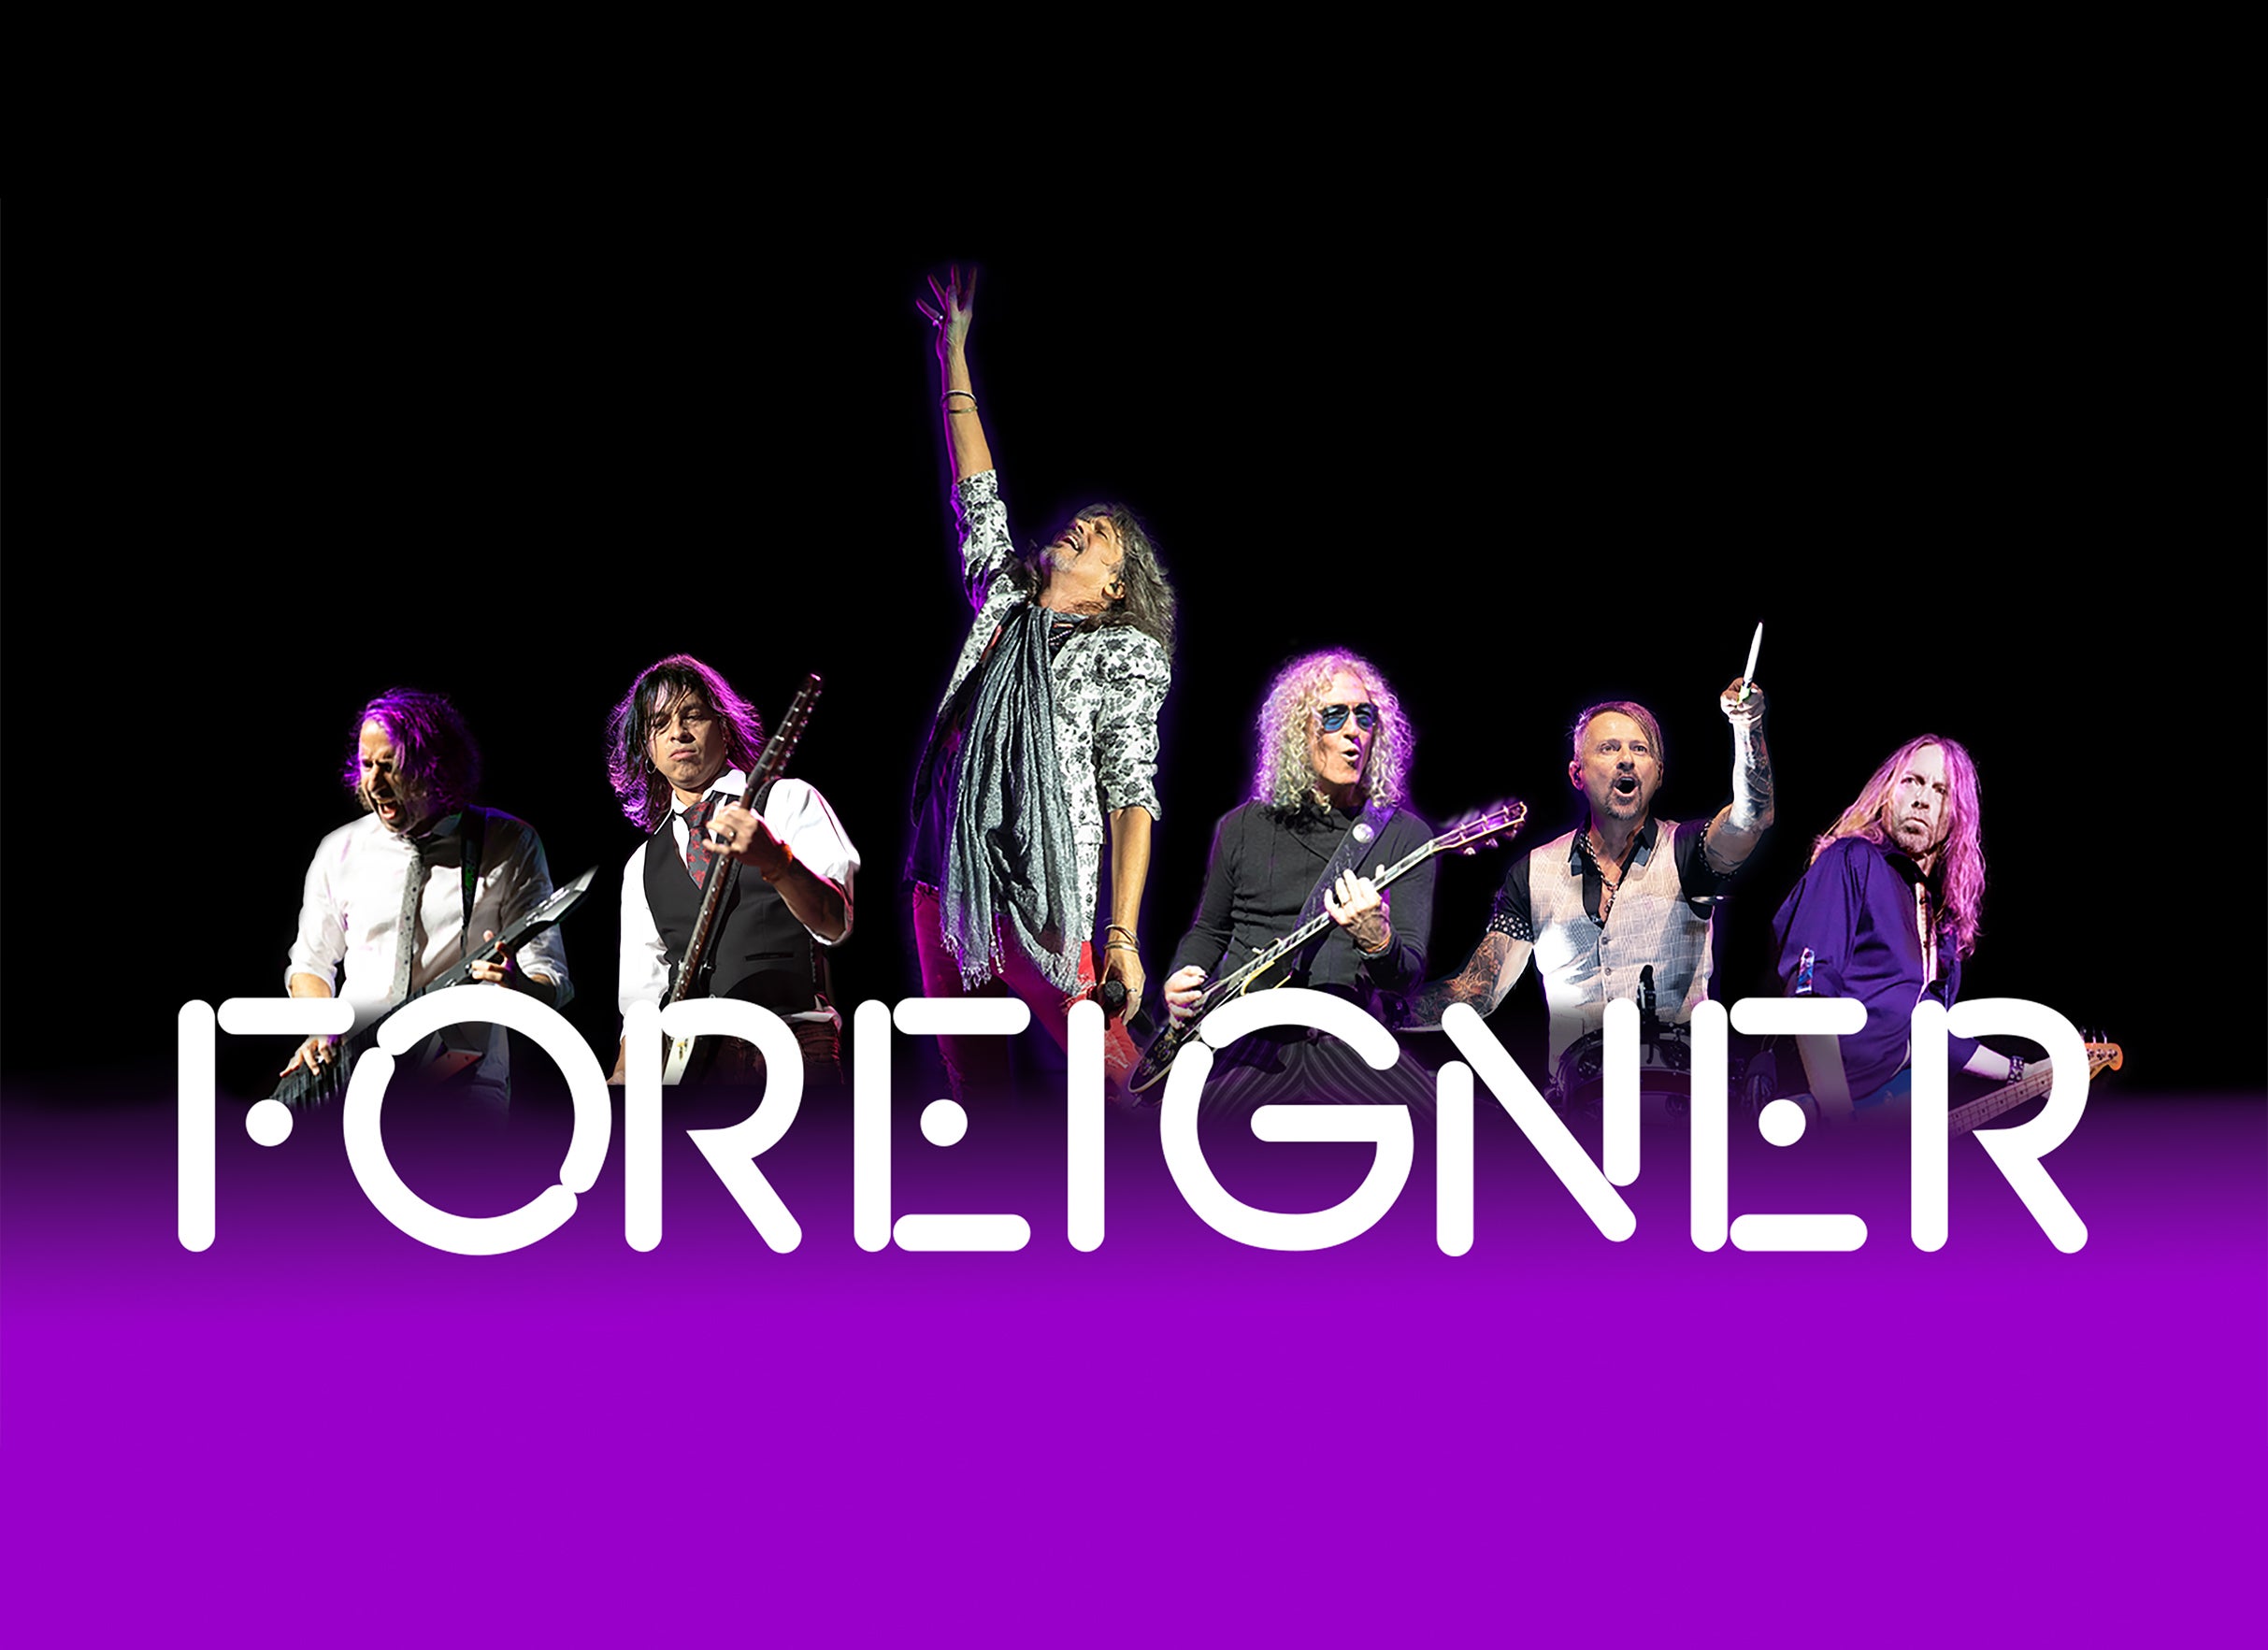 Foreigner: Feels Like the Last Time Farewell Tour in Las Vegas promo photo for Official Platinum presale offer code